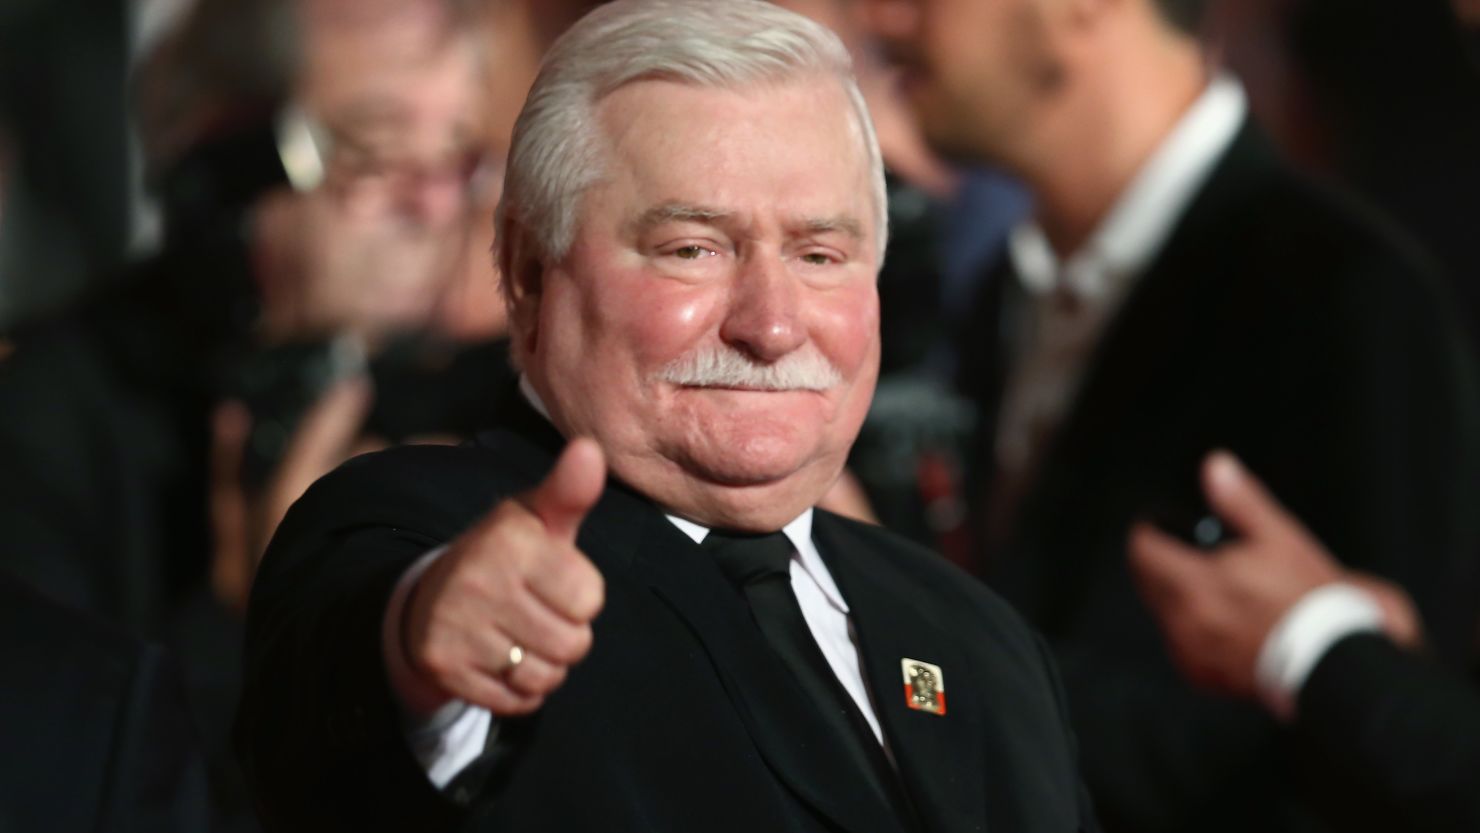 Lech Walesa attends the 'Walesa: Man Of Hope' Premiere during the 70th Venice International Film Festival at the Palazzo del Cinema on September 5, 2013 in Venice. 